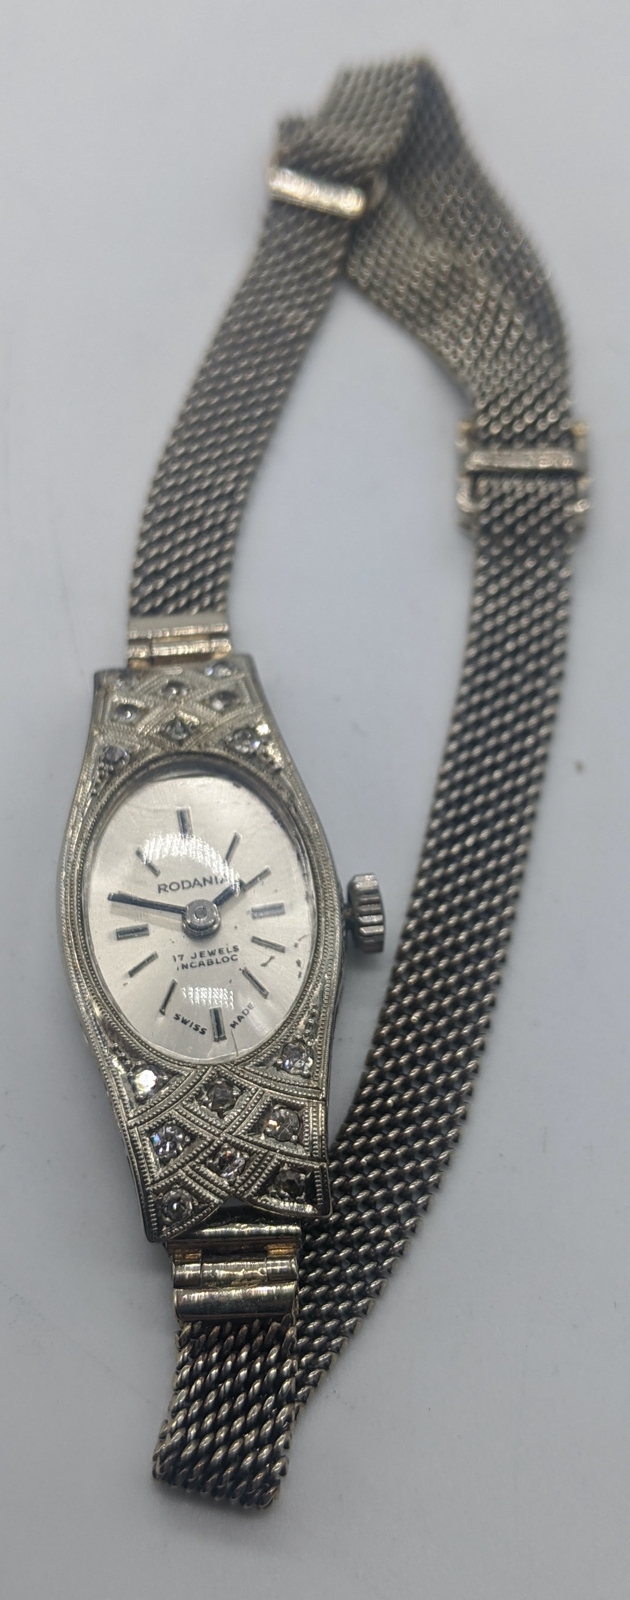 A Rodania ladies wristwatch with 18ct white gold case - Image 2 of 3